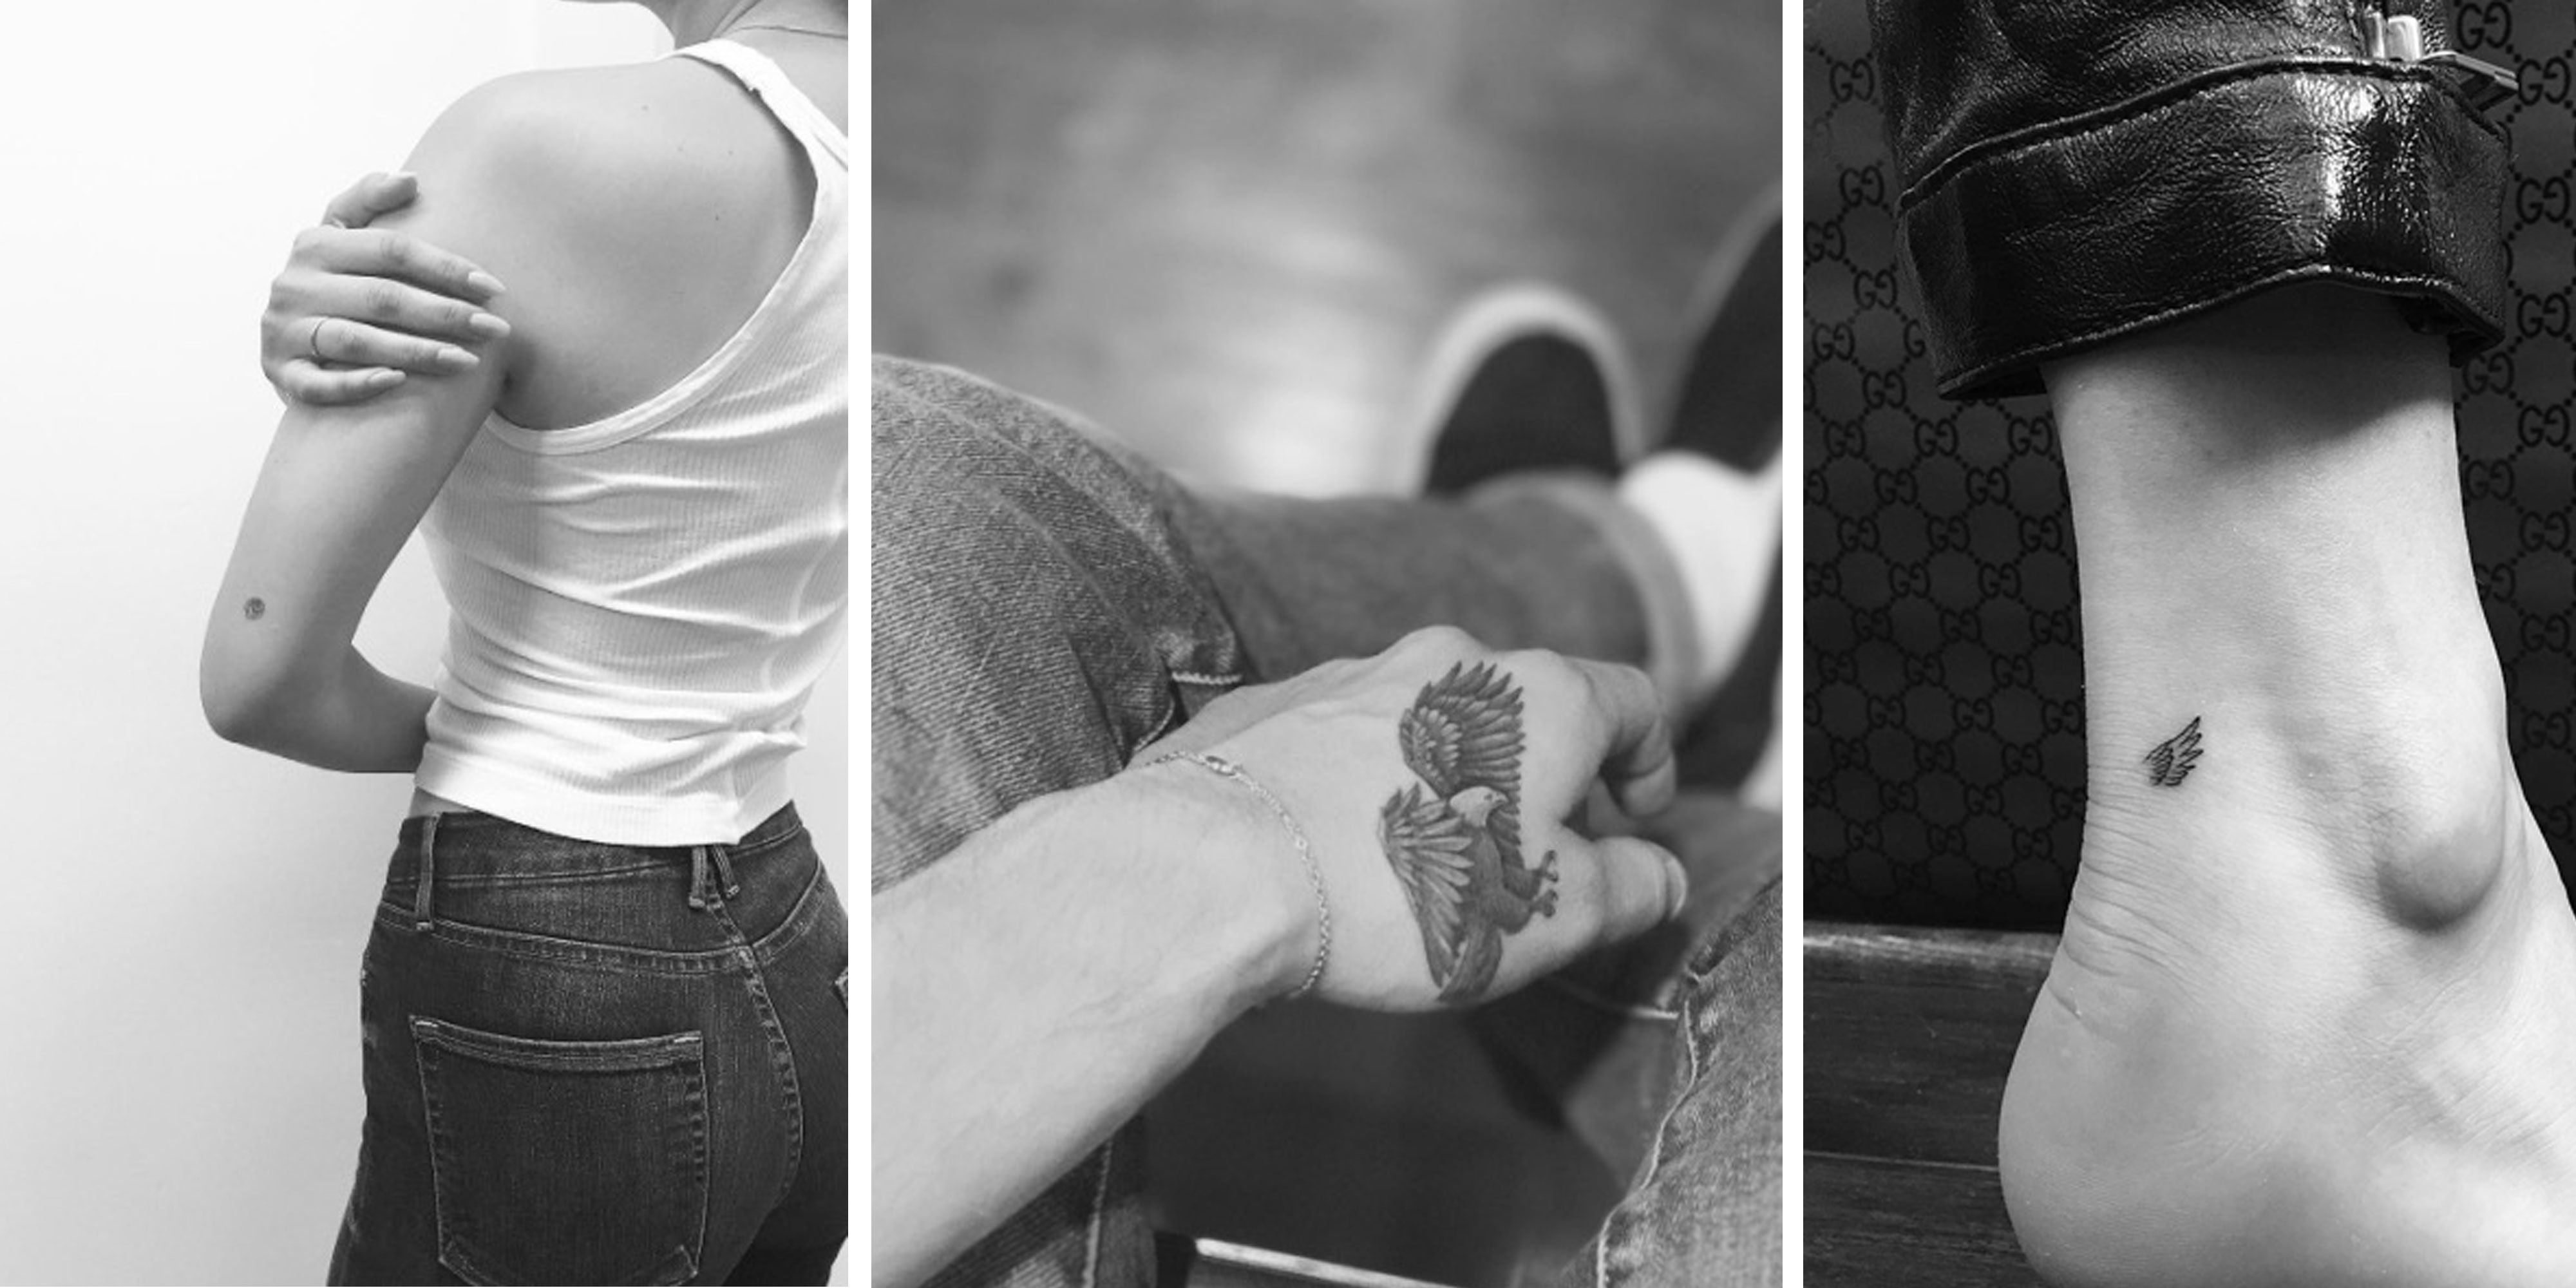 25 of the best celebrity tattoos | Pretty words, flowers, symbols - you  name it, it's here! | By Cosmopolitan UK | Facebook